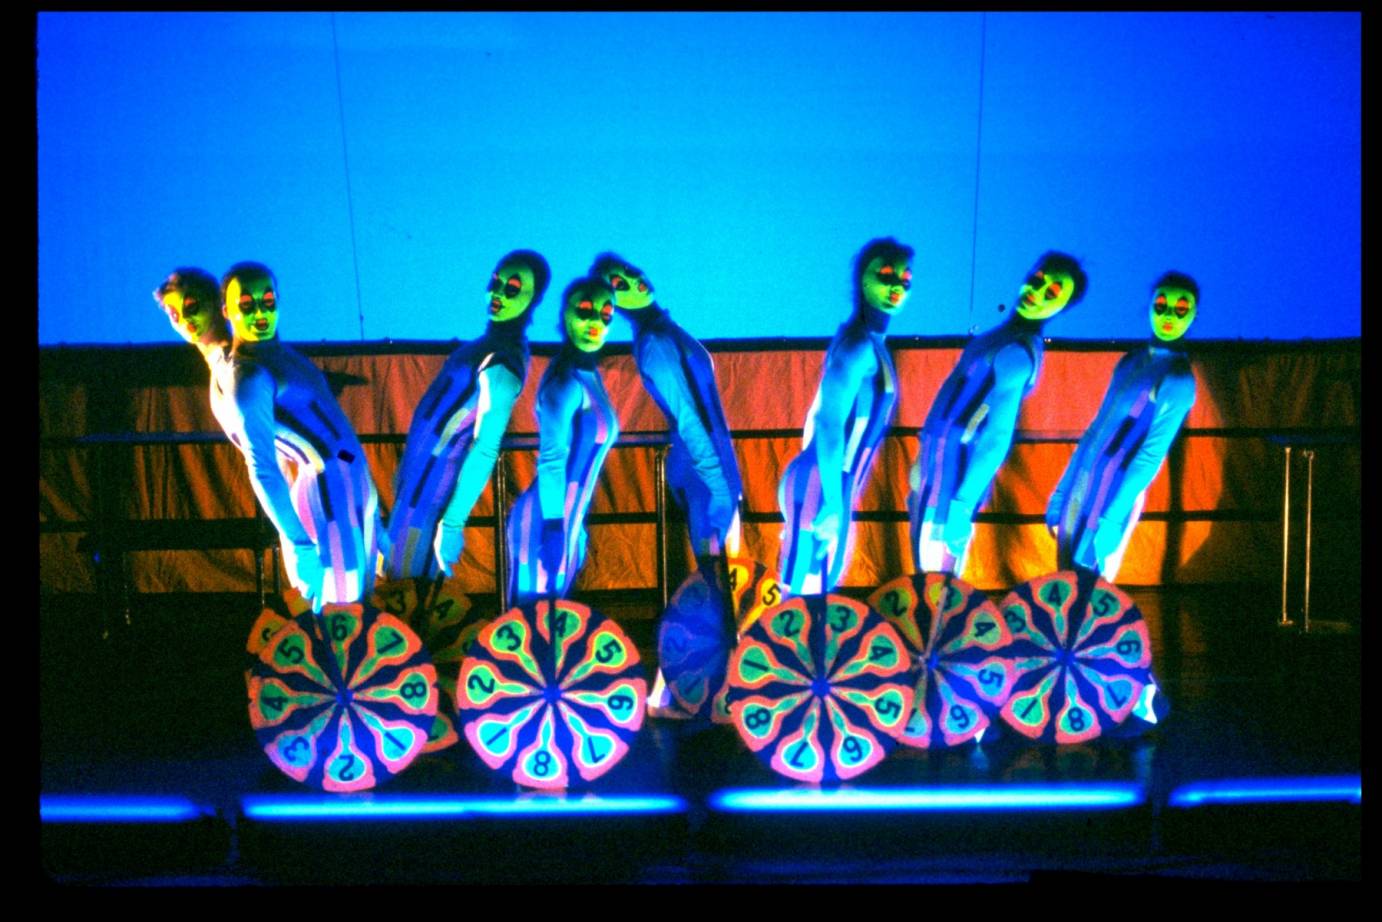 Dancers resembling clowns with neon green faces and standing on or behind pin wheel-looking installations.